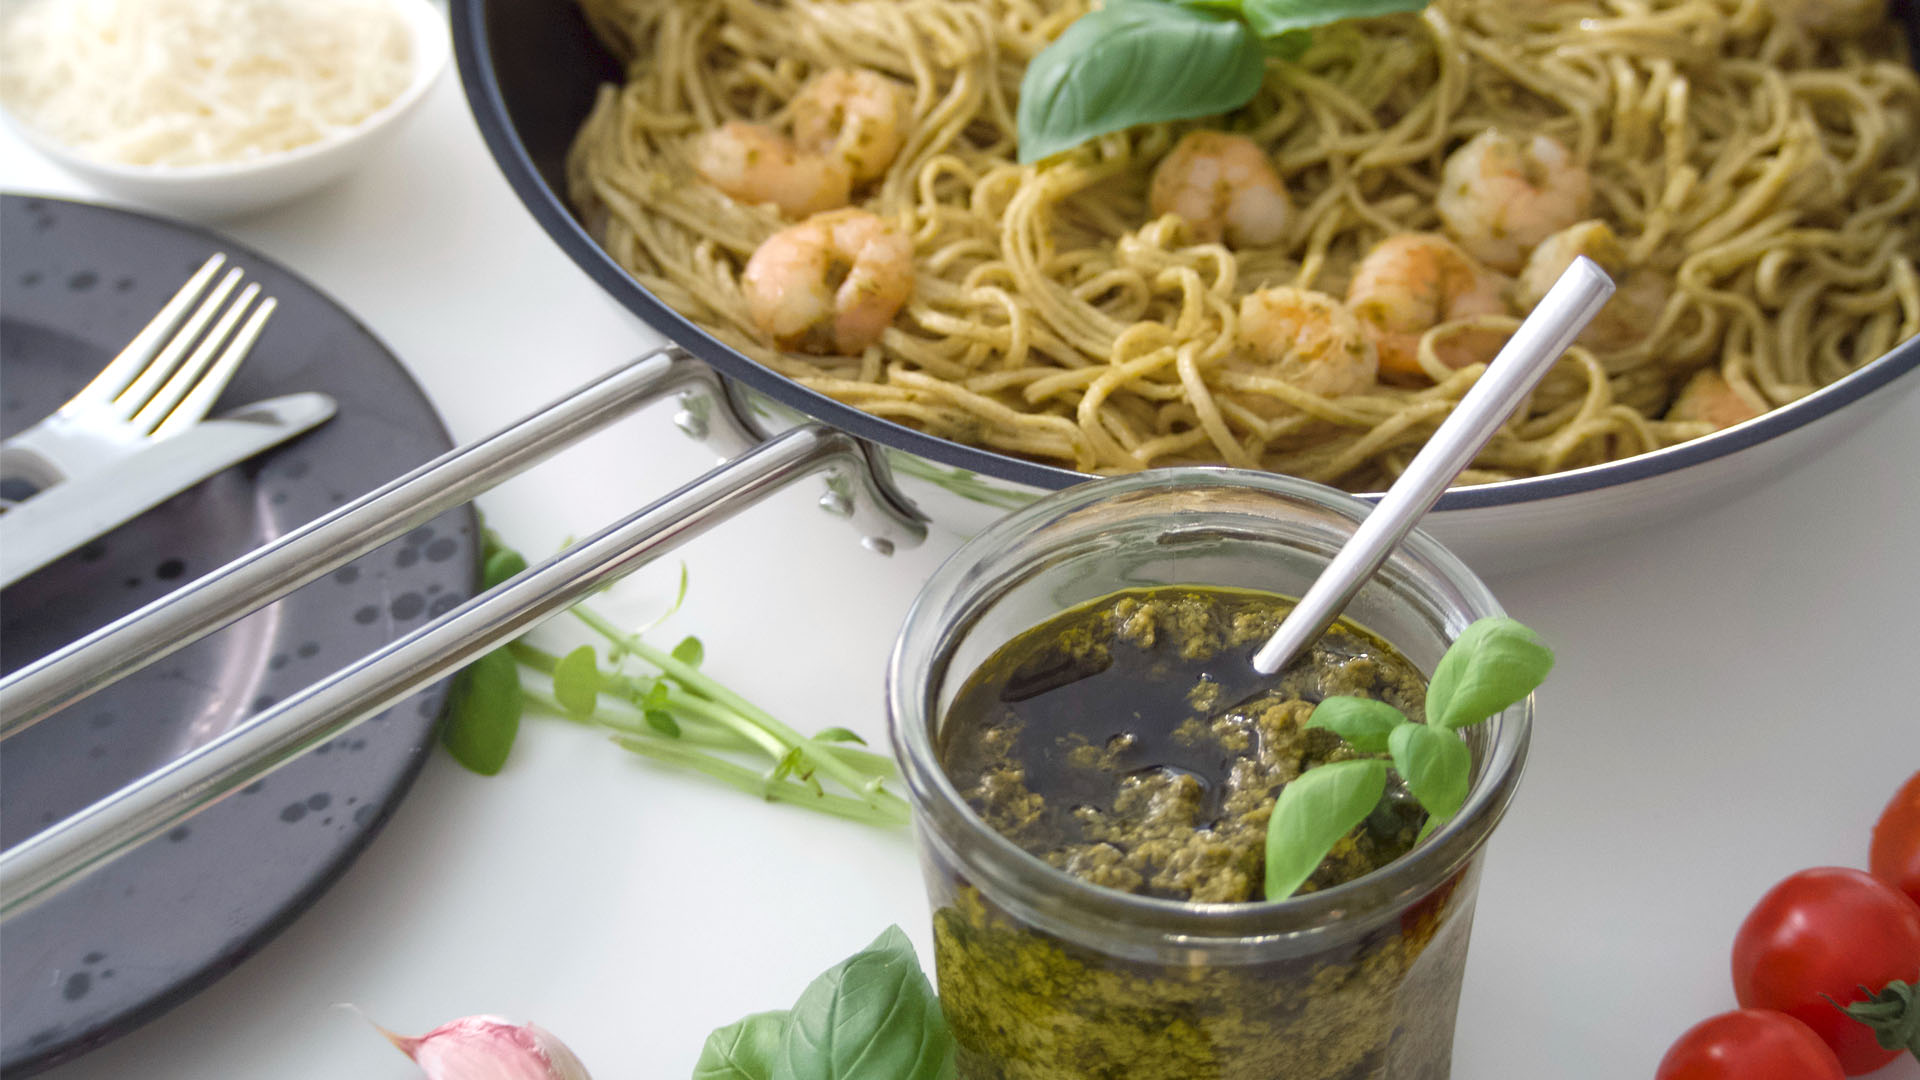 Featured image for “SuperFood Pesto”